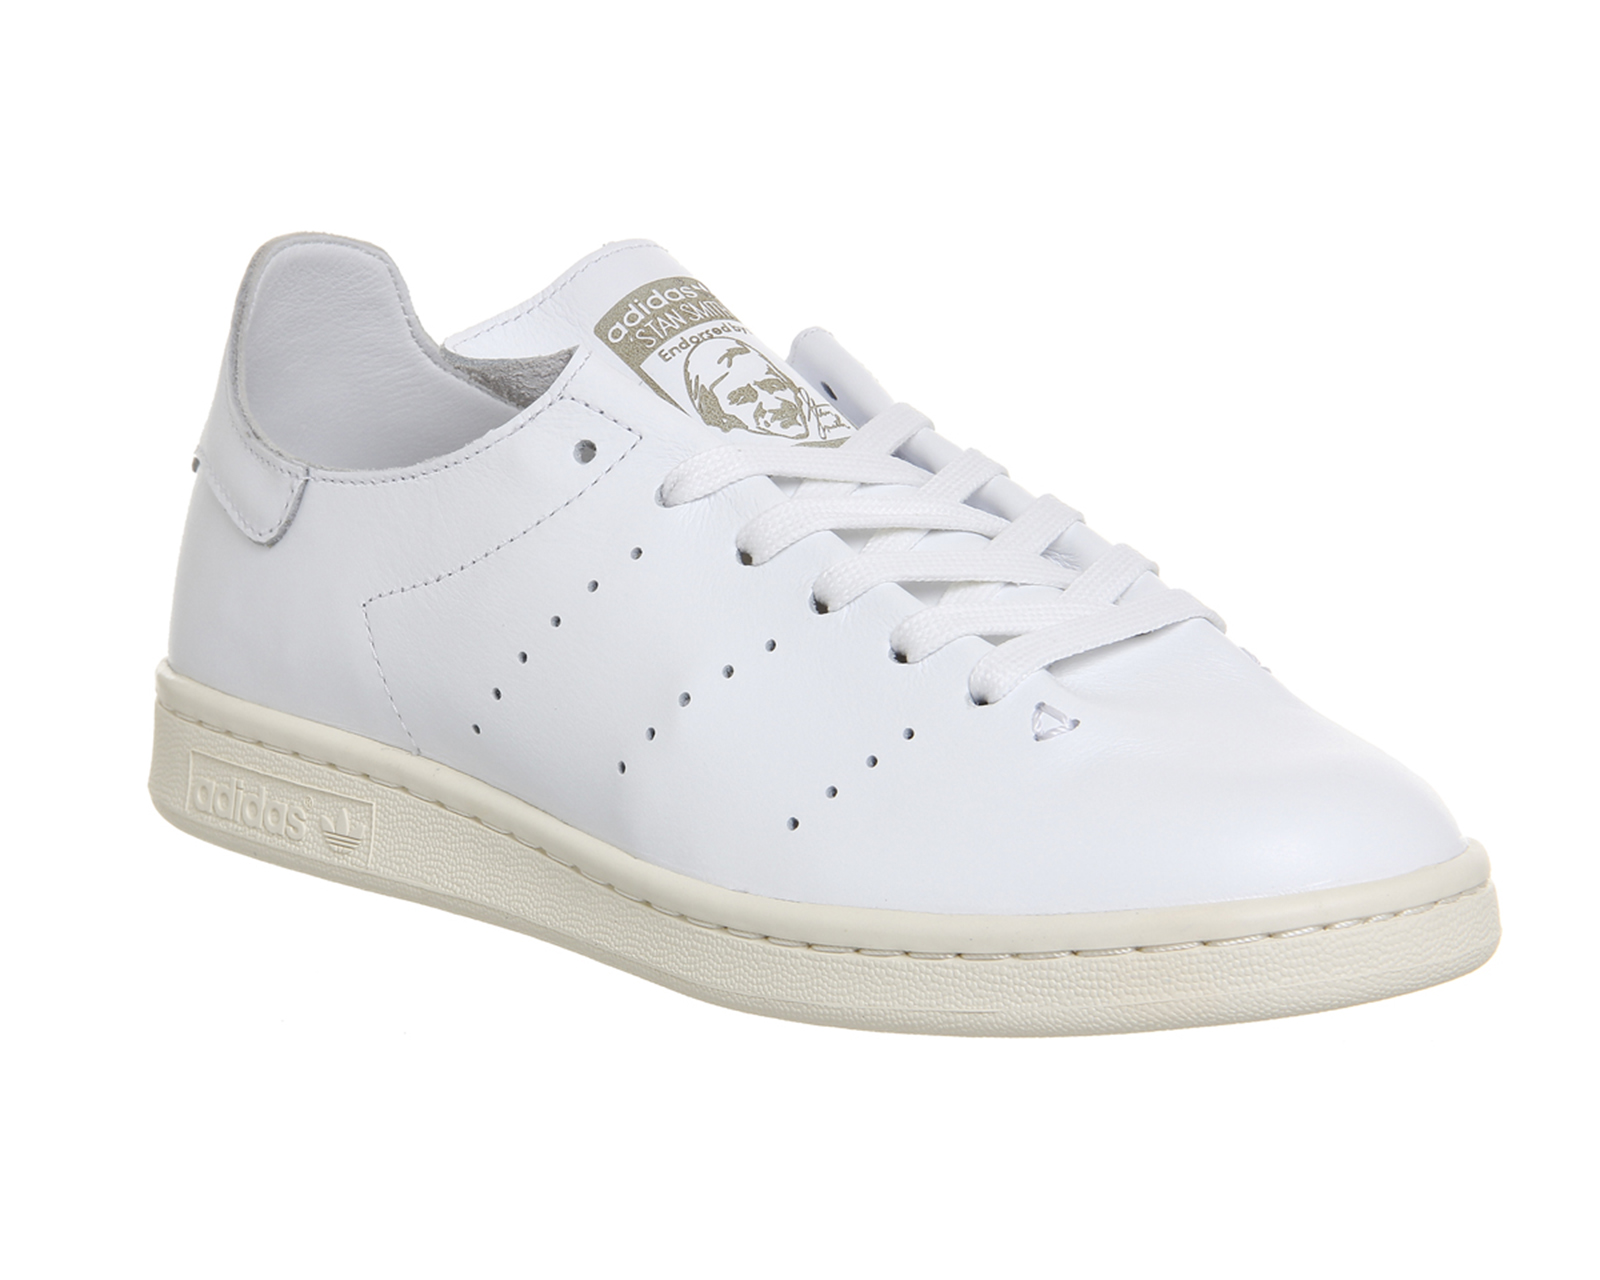 Stan Smith Lea Sock Italy, SAVE 33% - aveclumiere.com